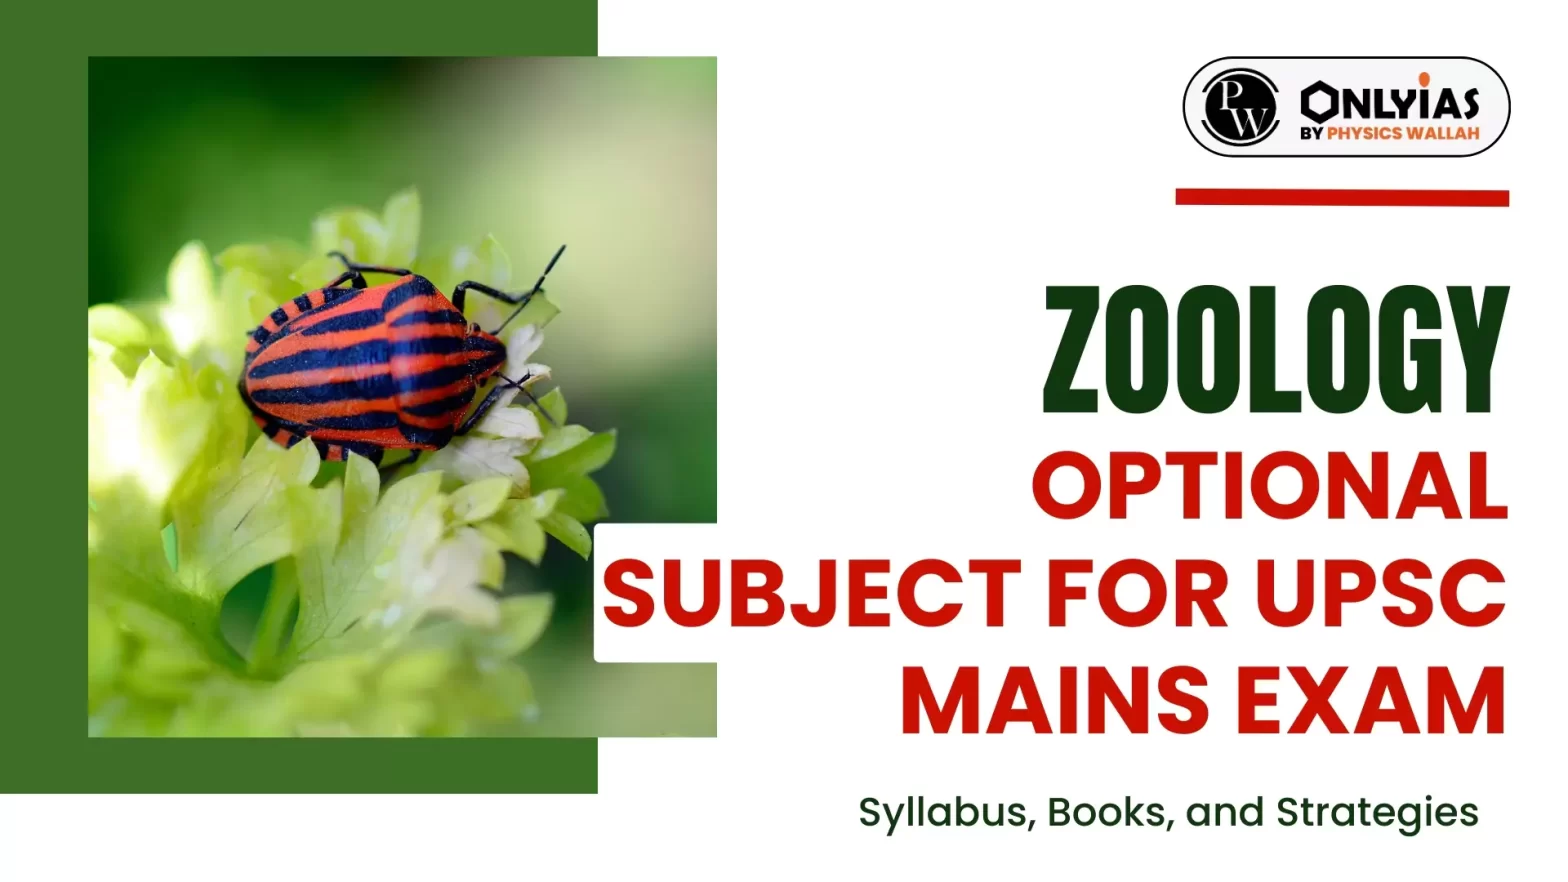 Zoology Optional Subject for UPSC Mains Exam: Syllabus, Books, and Strategies